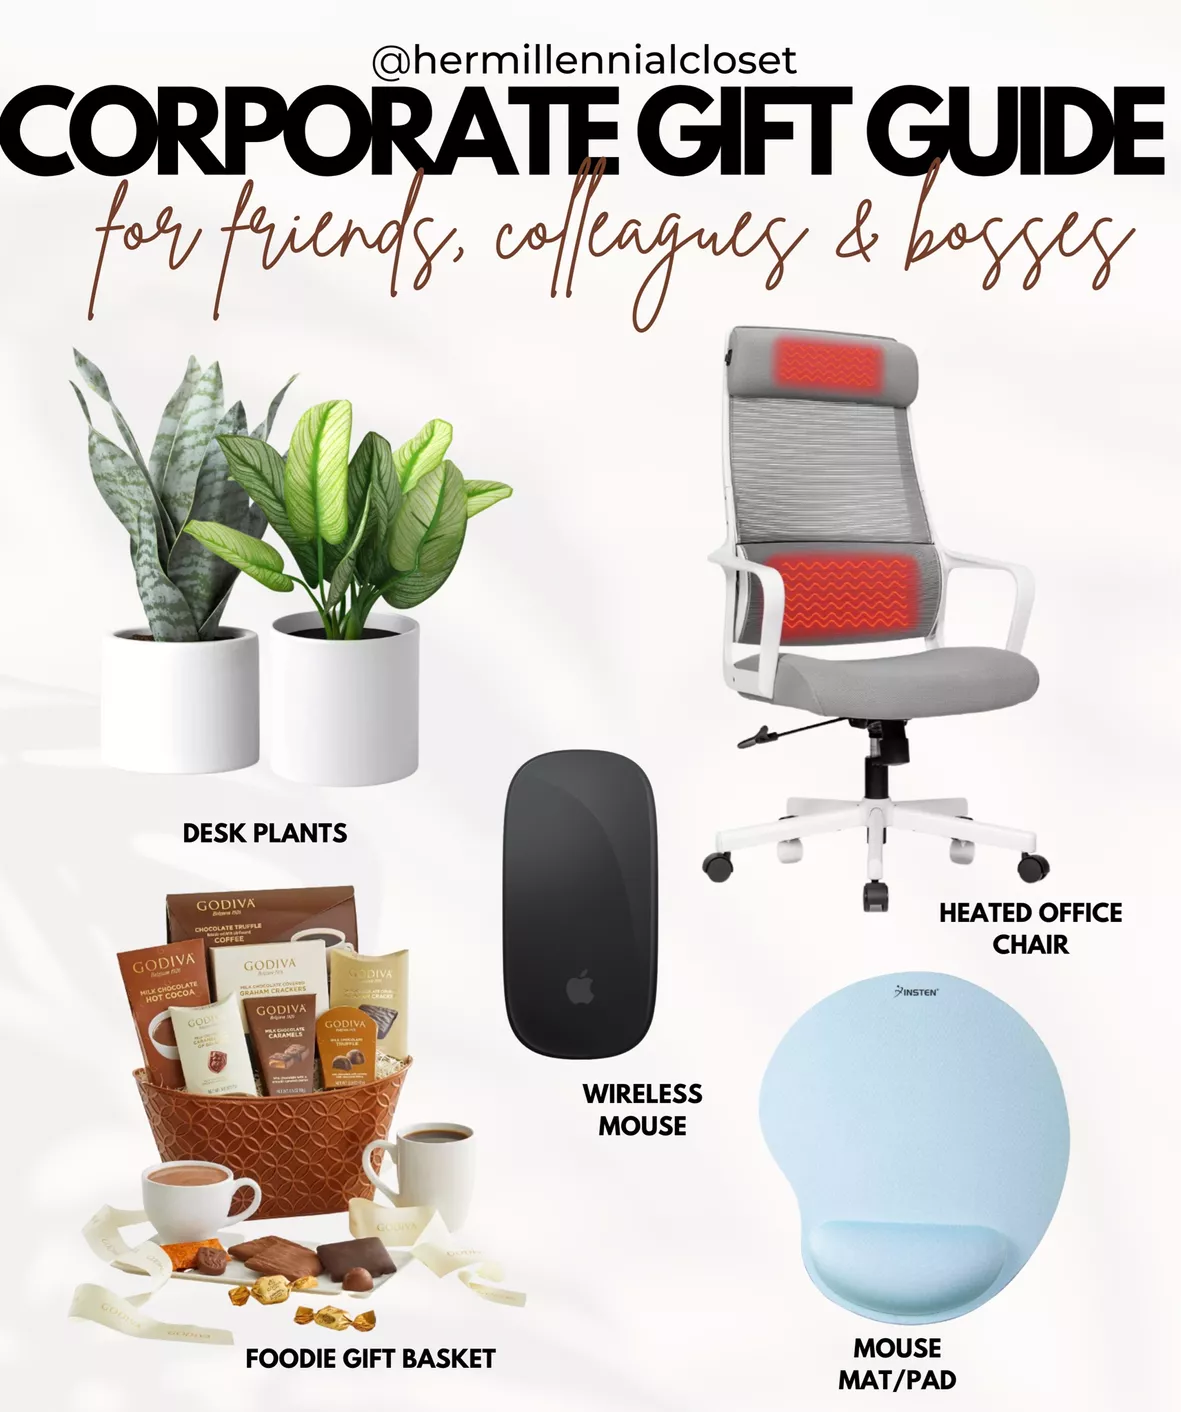 Gifts for Boss, Gifts for Colleagues, Corporate Gifts